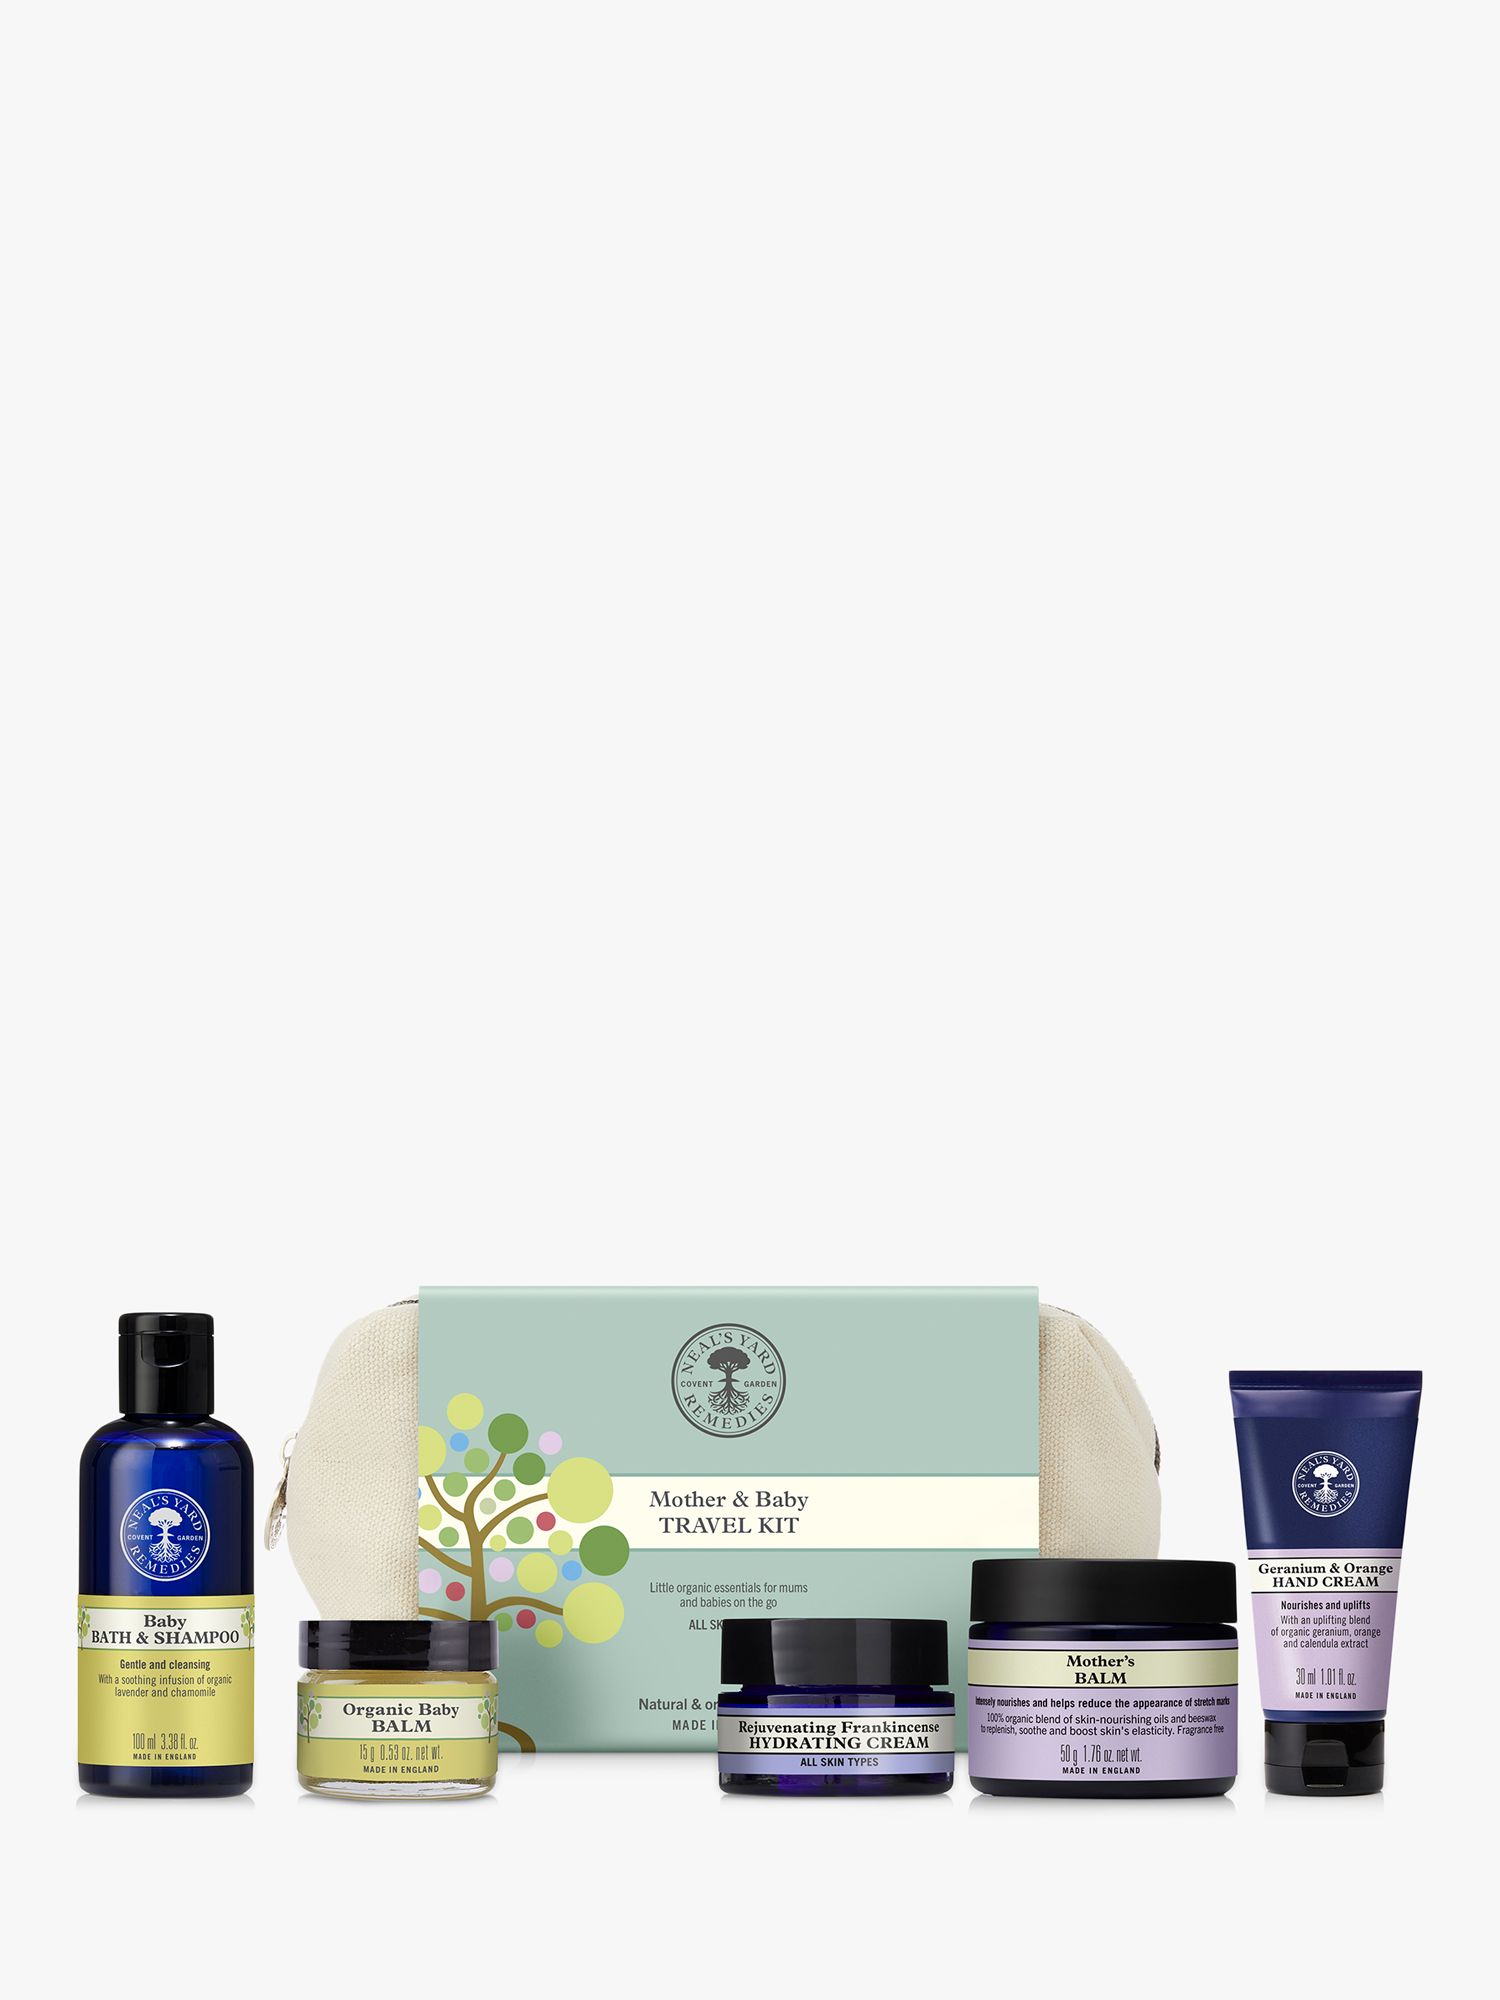 Neal's Yard Remedies Mother & Baby Travel Kit